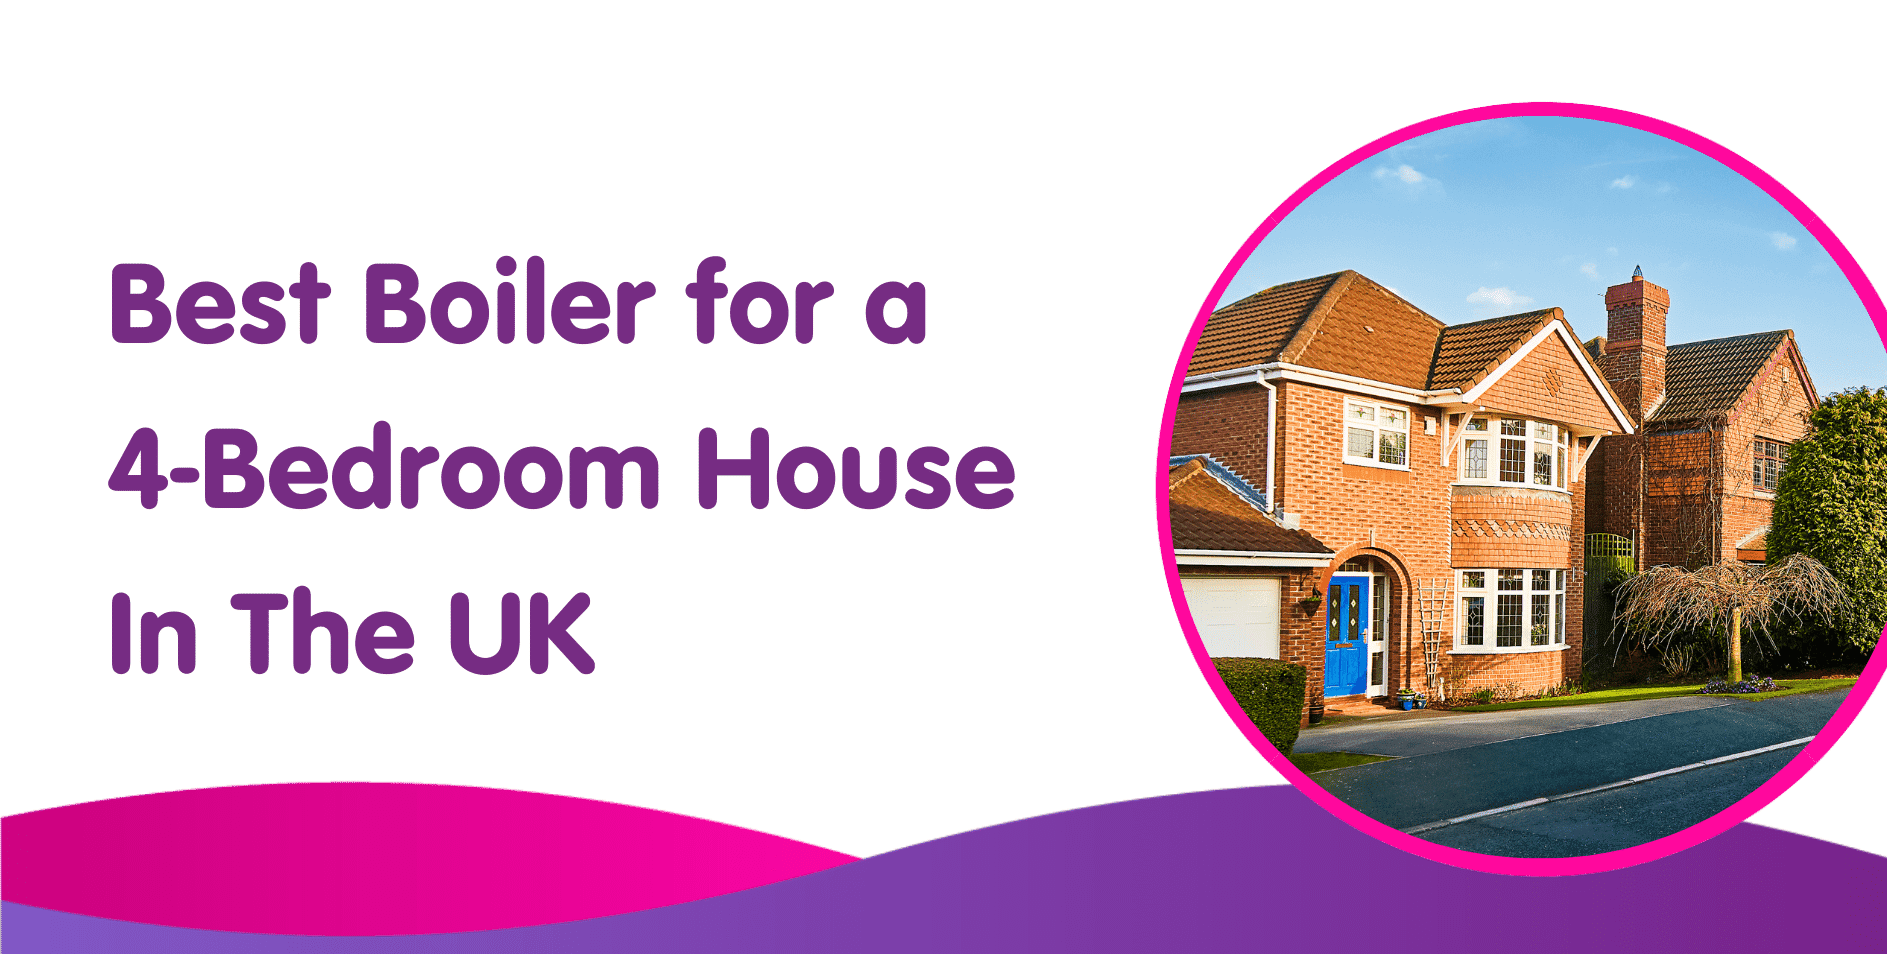 Best Boiler for a 4-Bedroom House In The UK